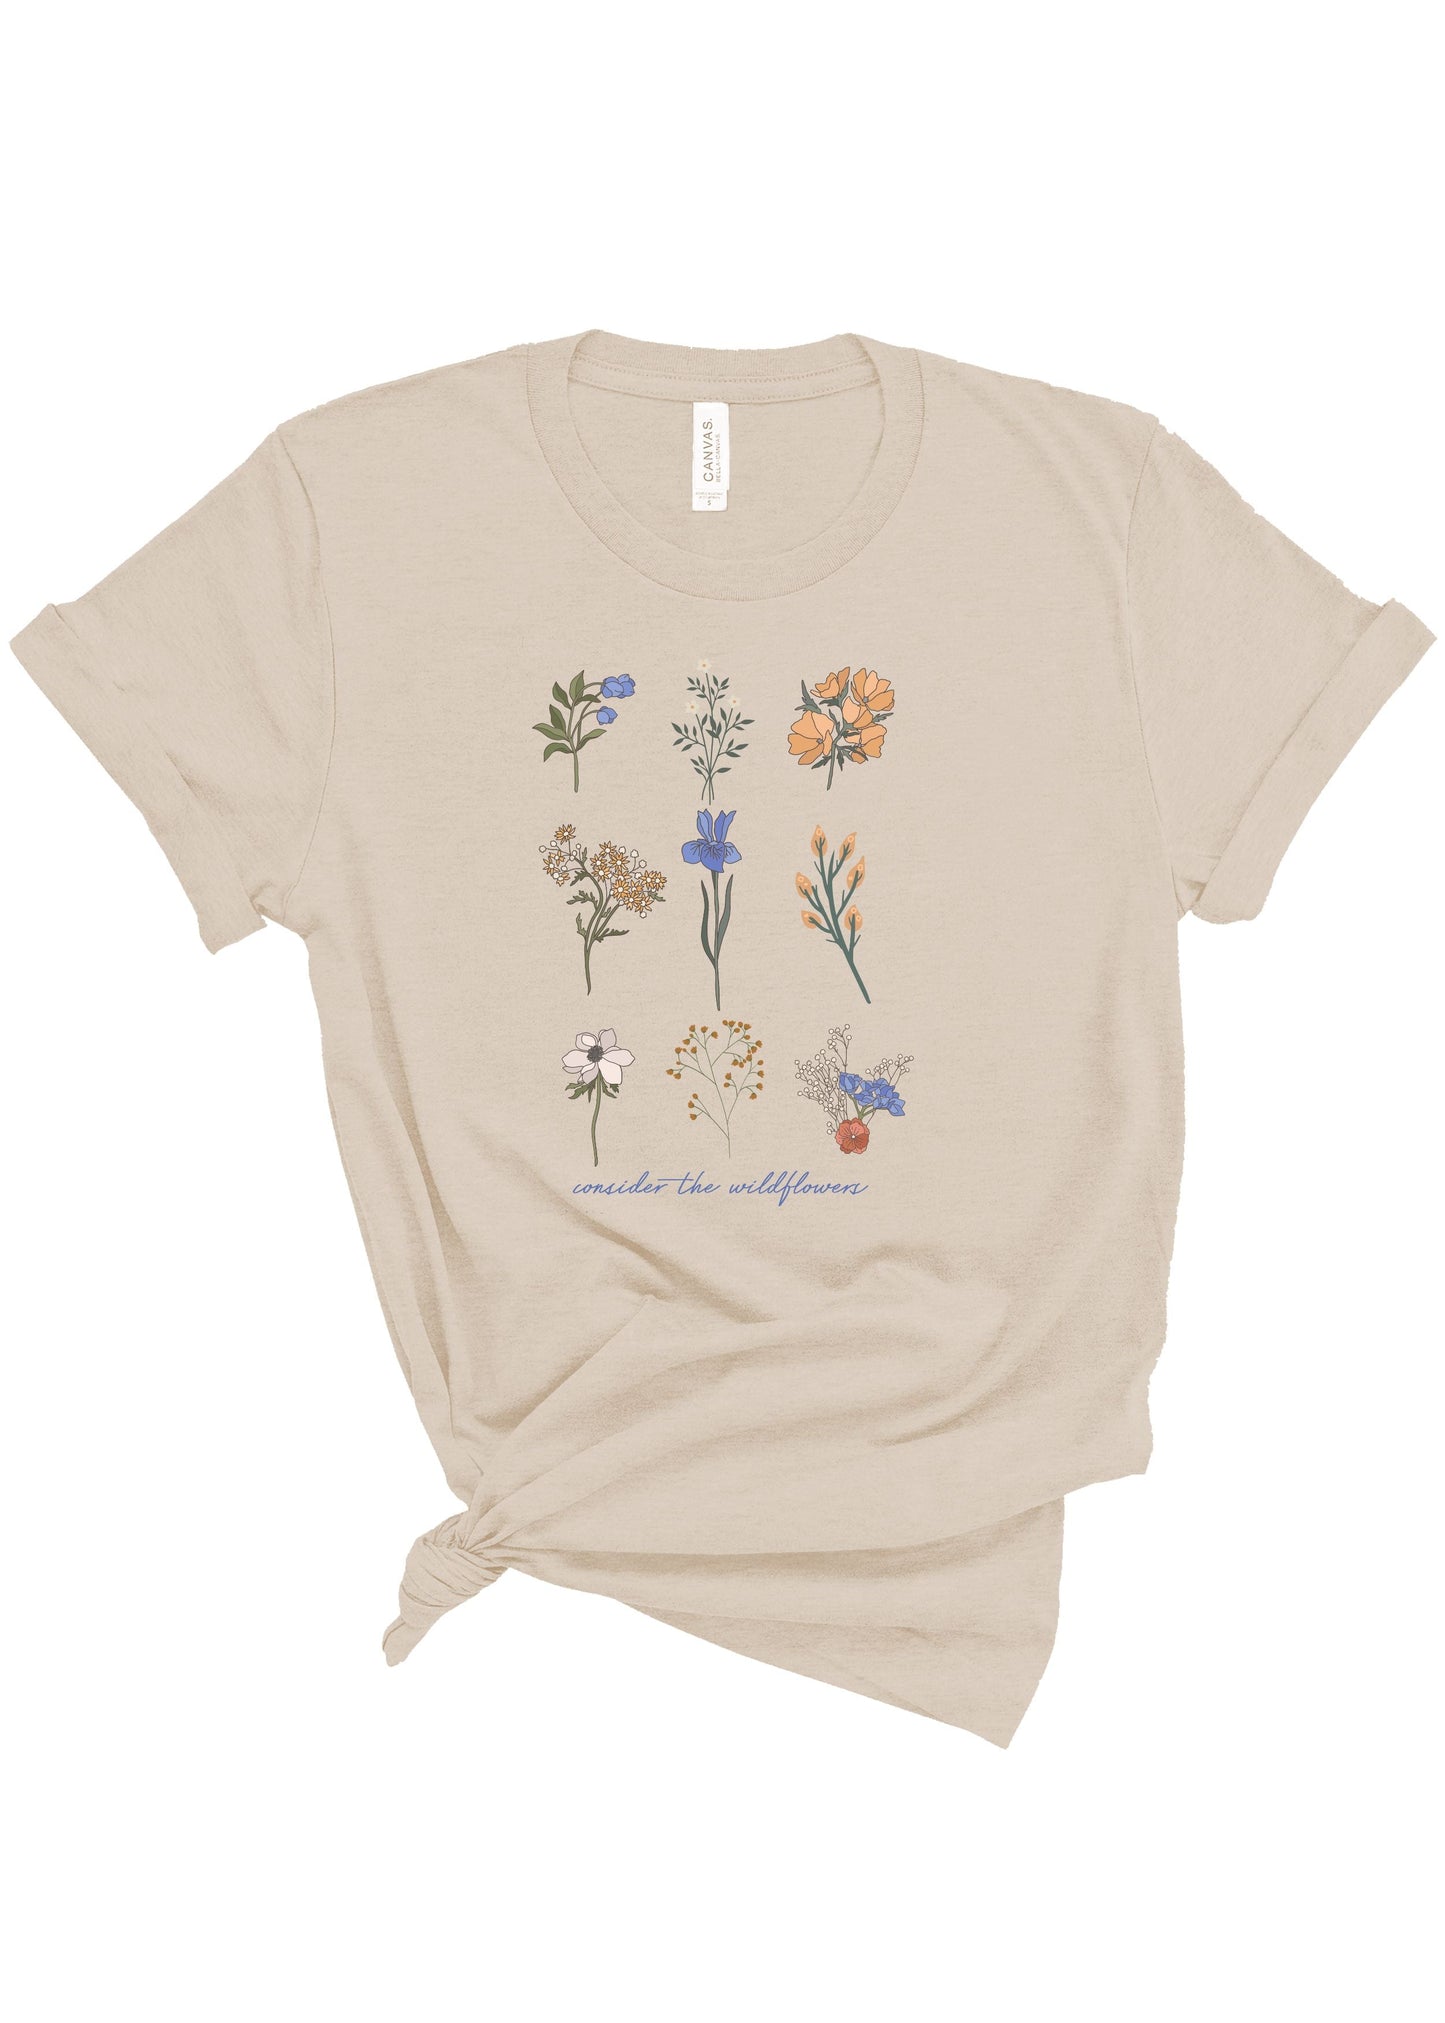 Consider The Wildflowers | Tee | Adult-Sister Shirts-Sister Shirts, Cute & Custom Tees for Mama & Littles in Trussville, Alabama.